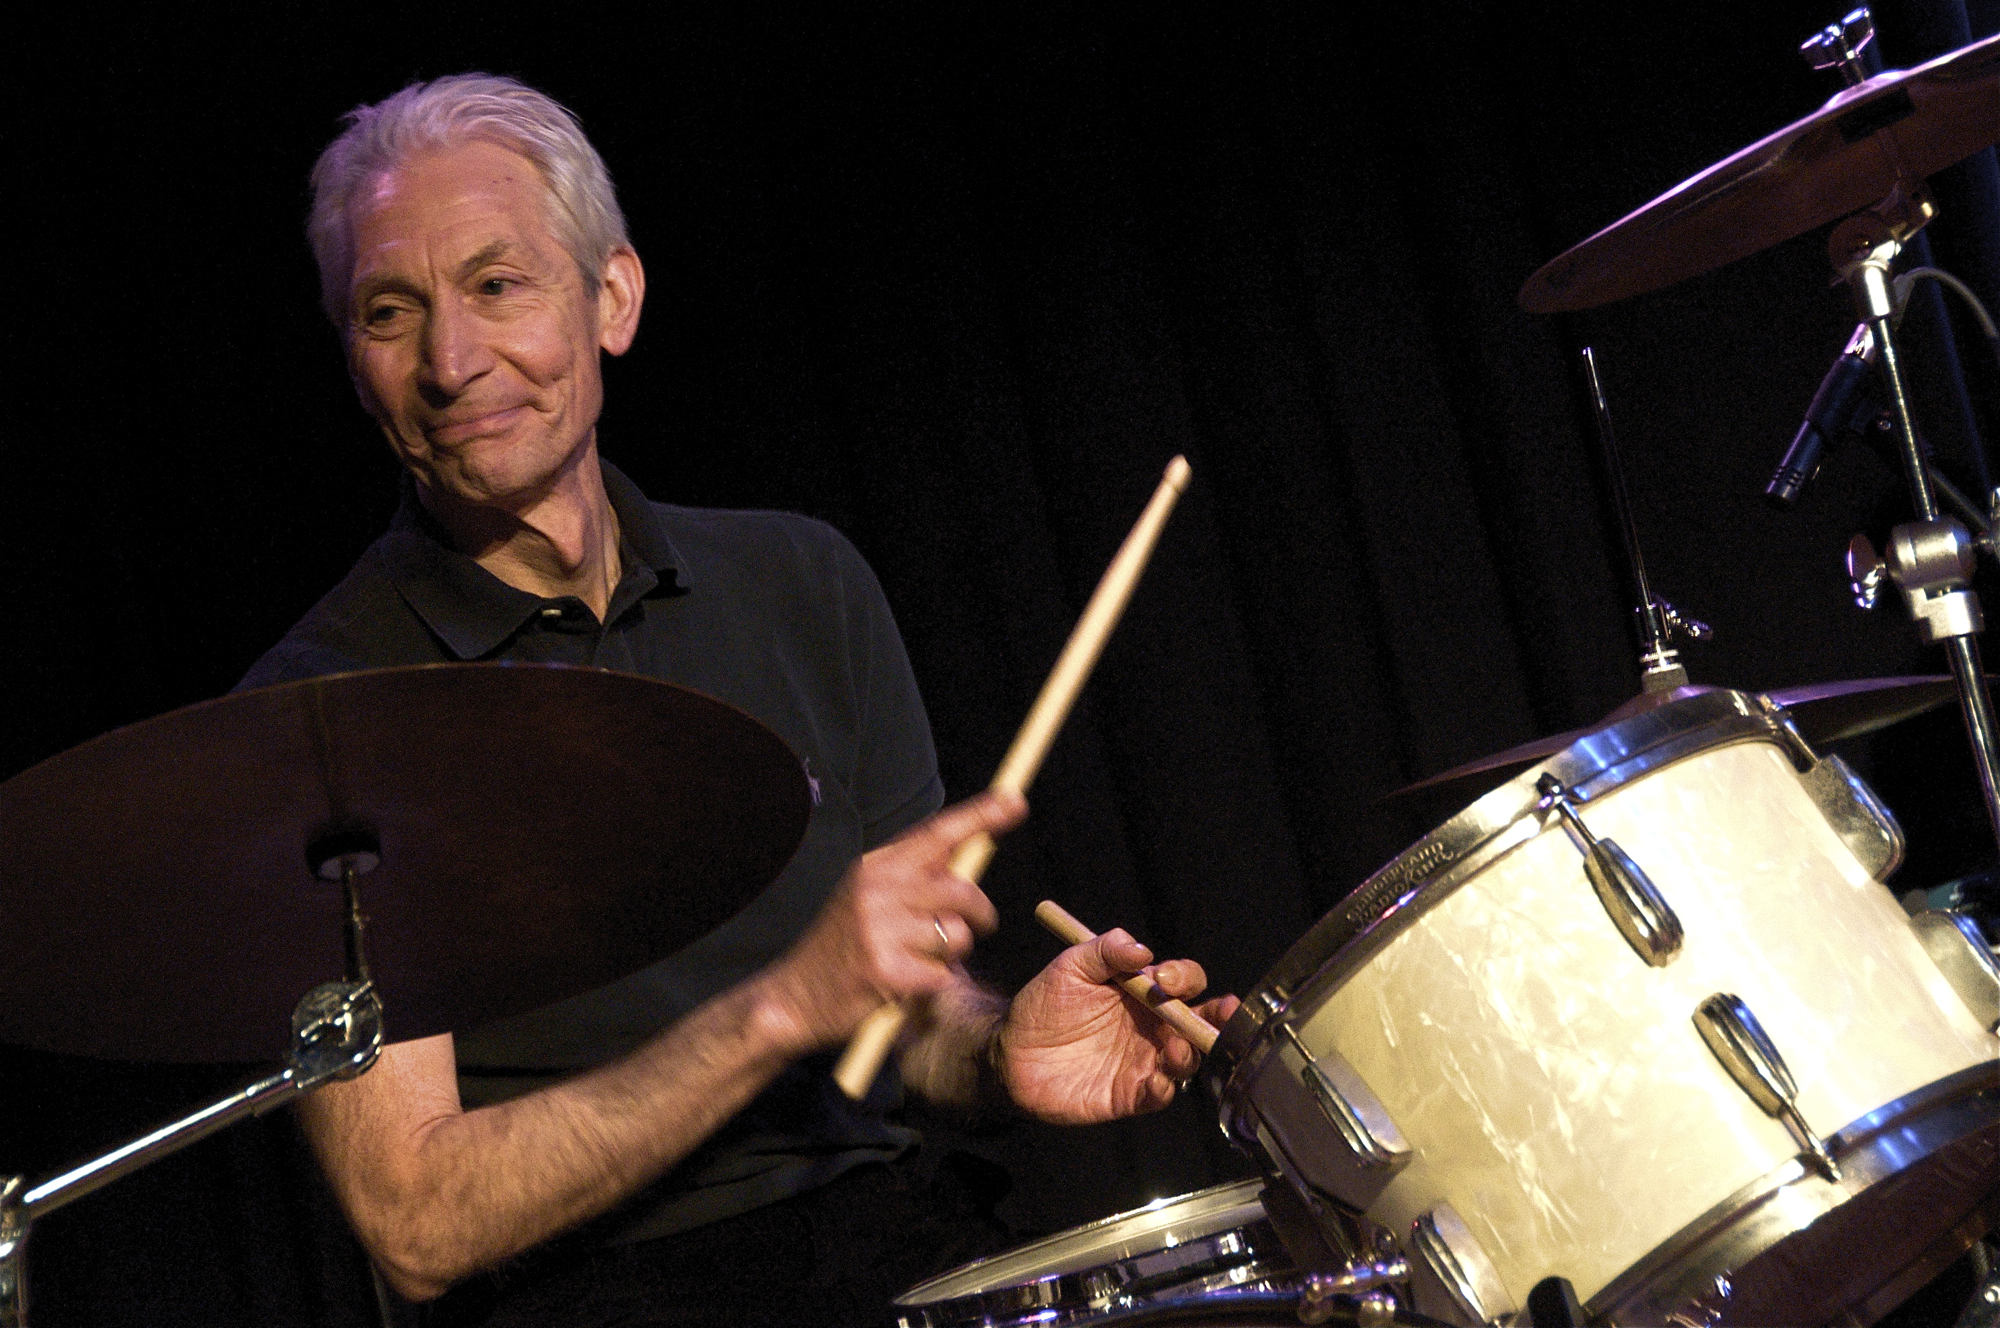 It's only Charlie Watts...but we like it!